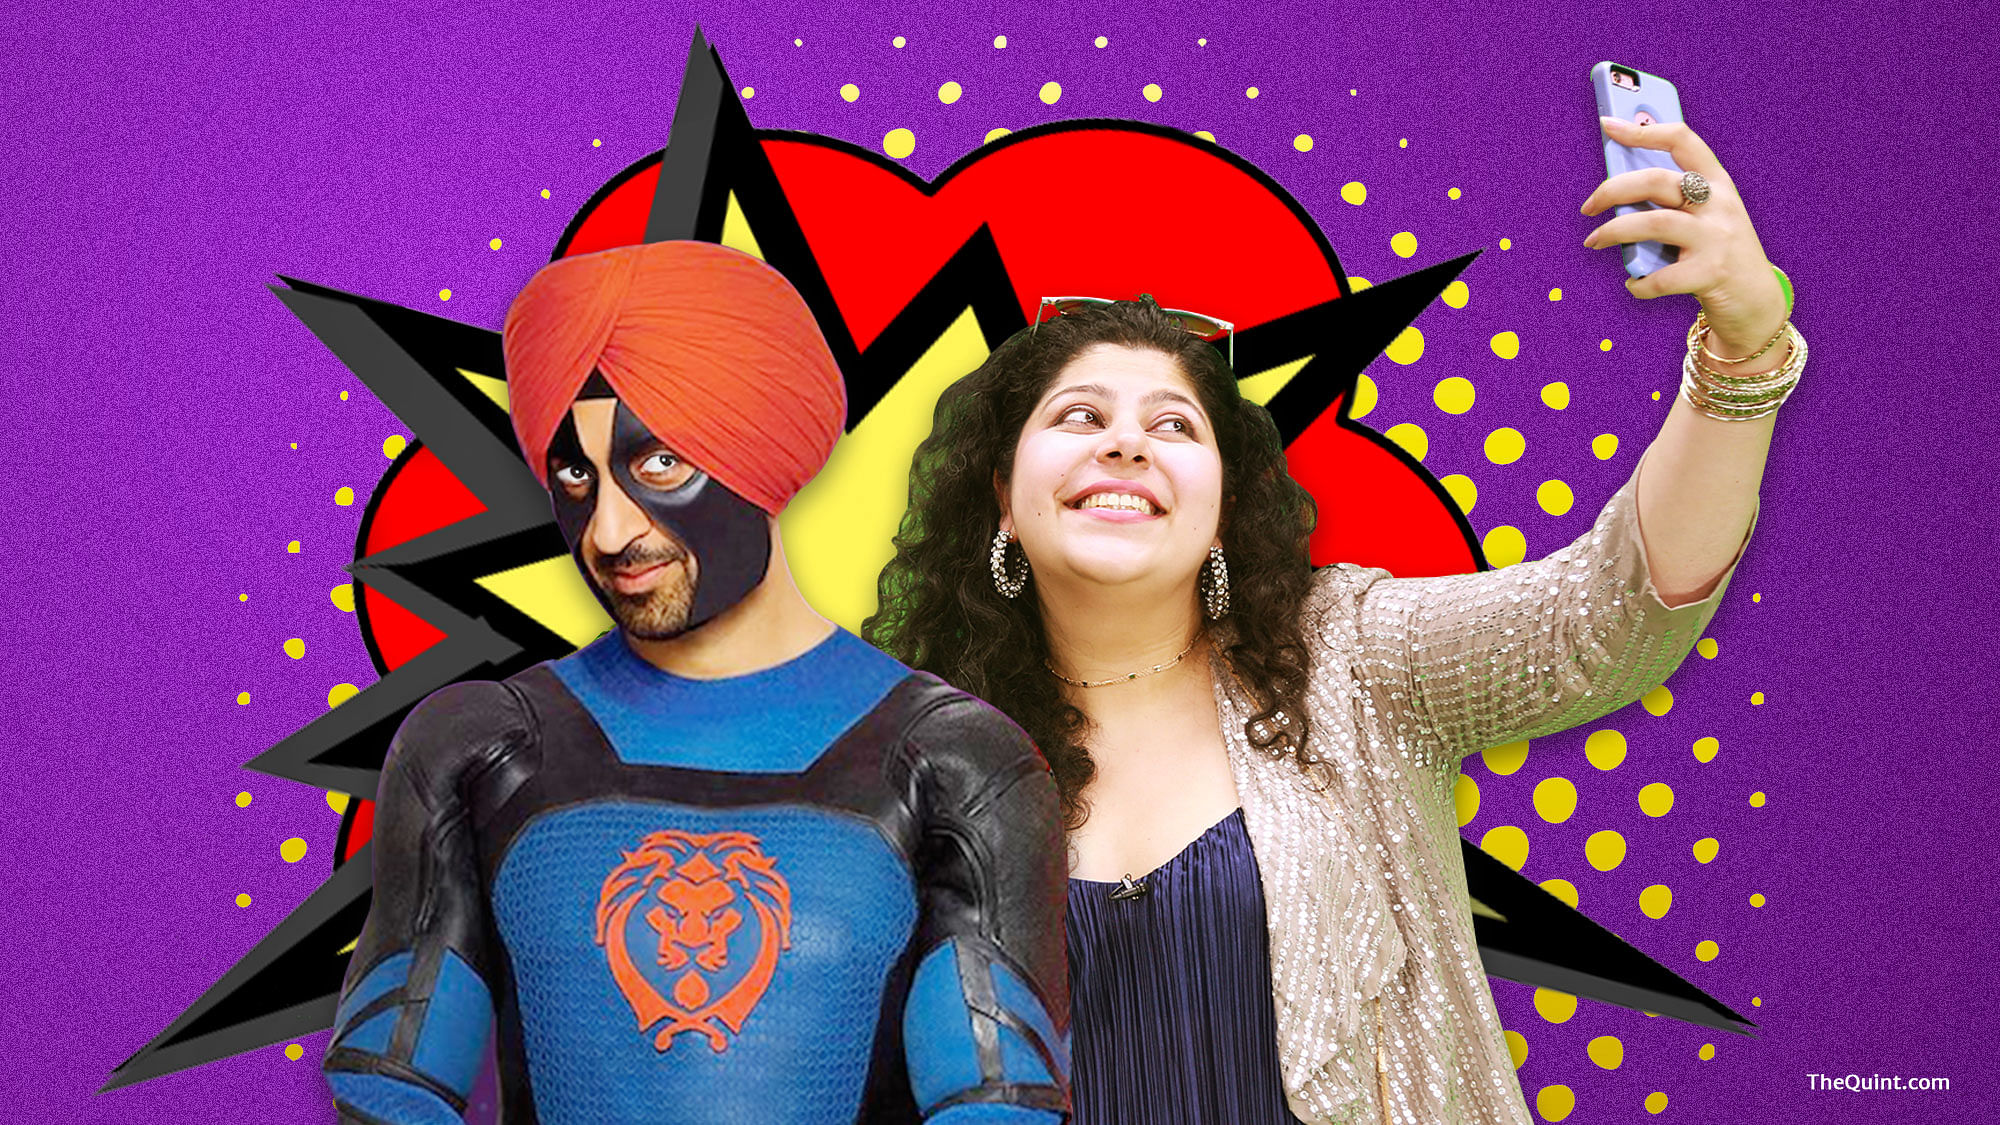  Super Singh is the story of a Sikh superhero who wants to join the ranks of Spider-Man and Batman. (Photo Courtesy: Twitter/<a href="https://twitter.com/diljitdosanjh/media">@diljitdosanjh</a>) &nbsp;